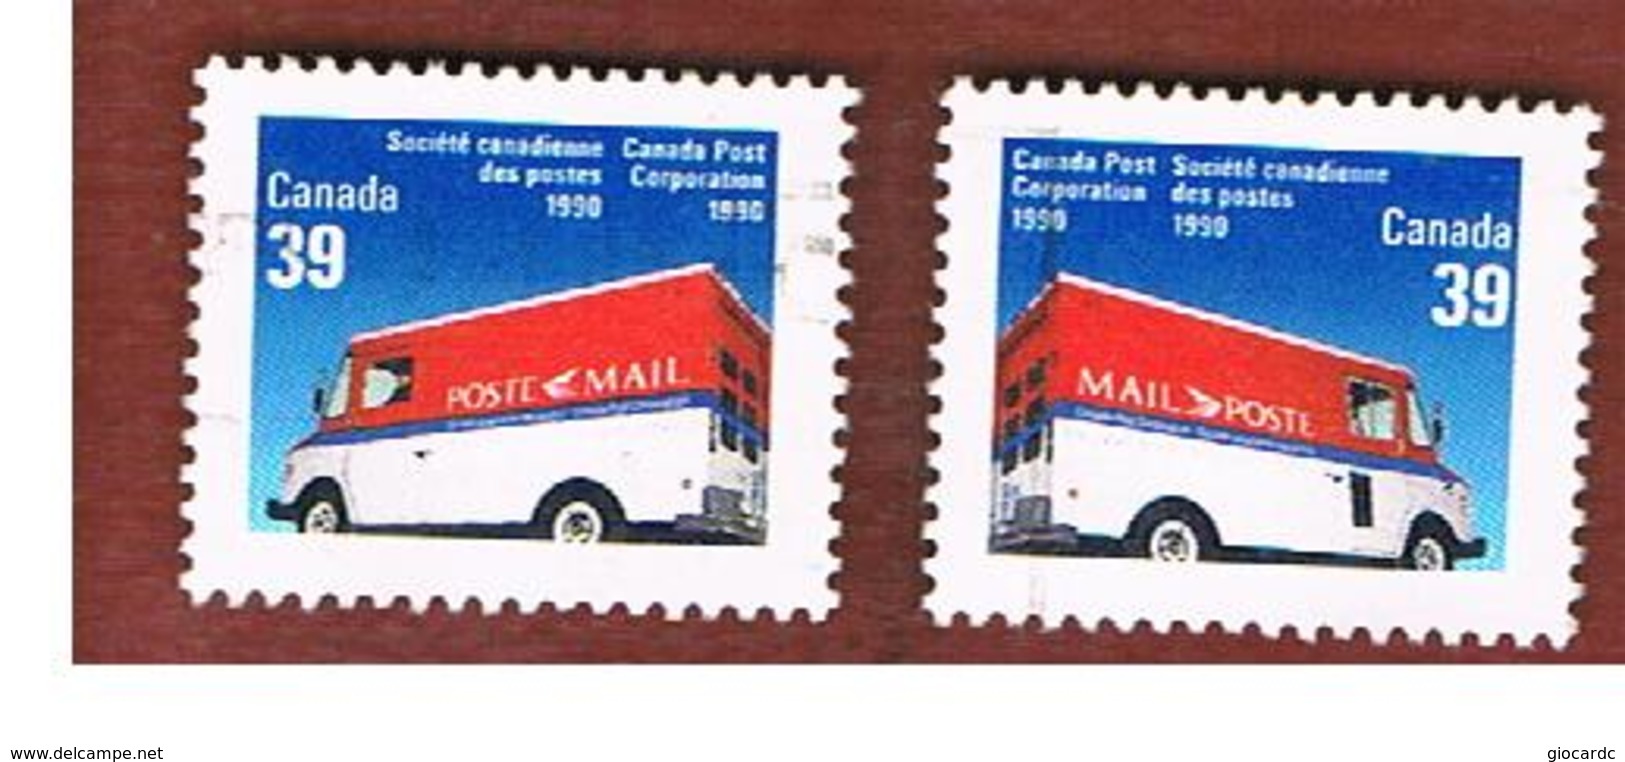 CANADA - SG 1382.1383  - 1990  MAIL VAN: COMPLET SET OF 2    -   USED - Usati